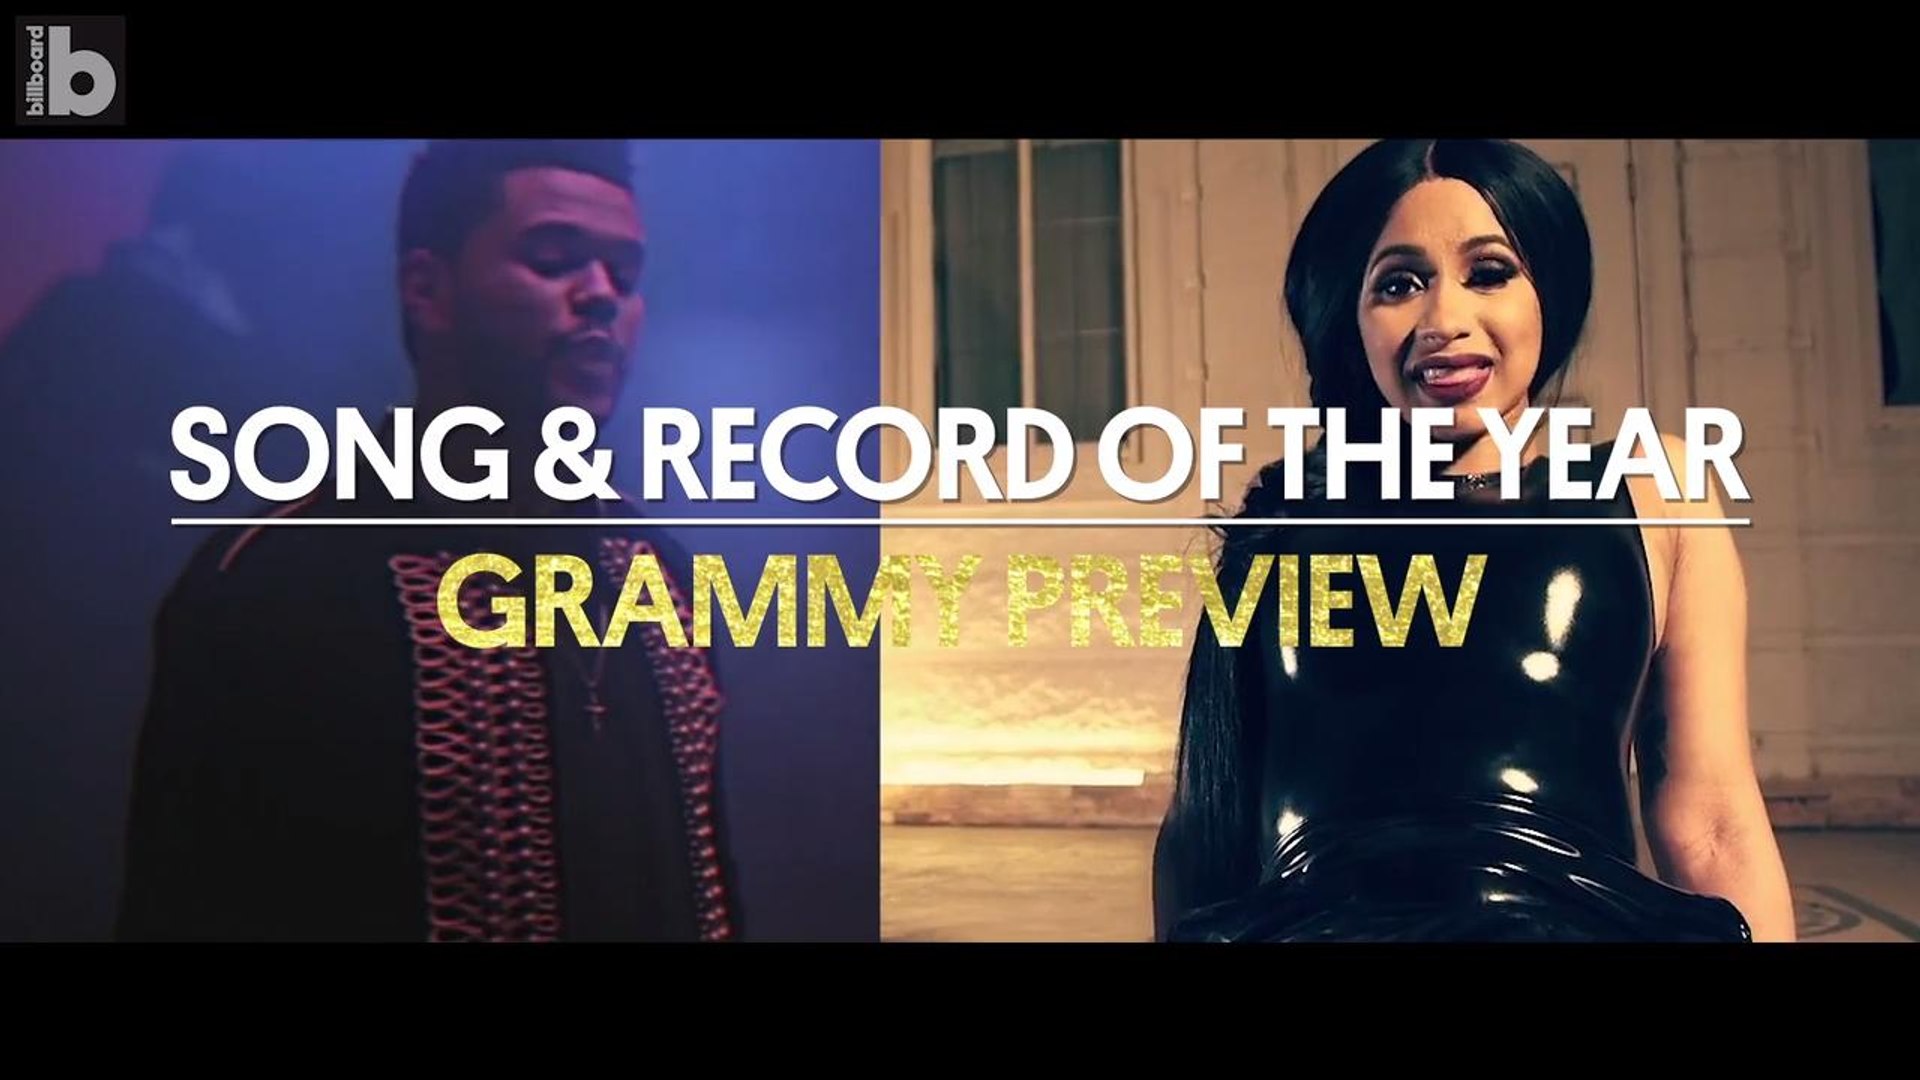 Grammy Preview: Song vs. Record of The Year | Experts Debate